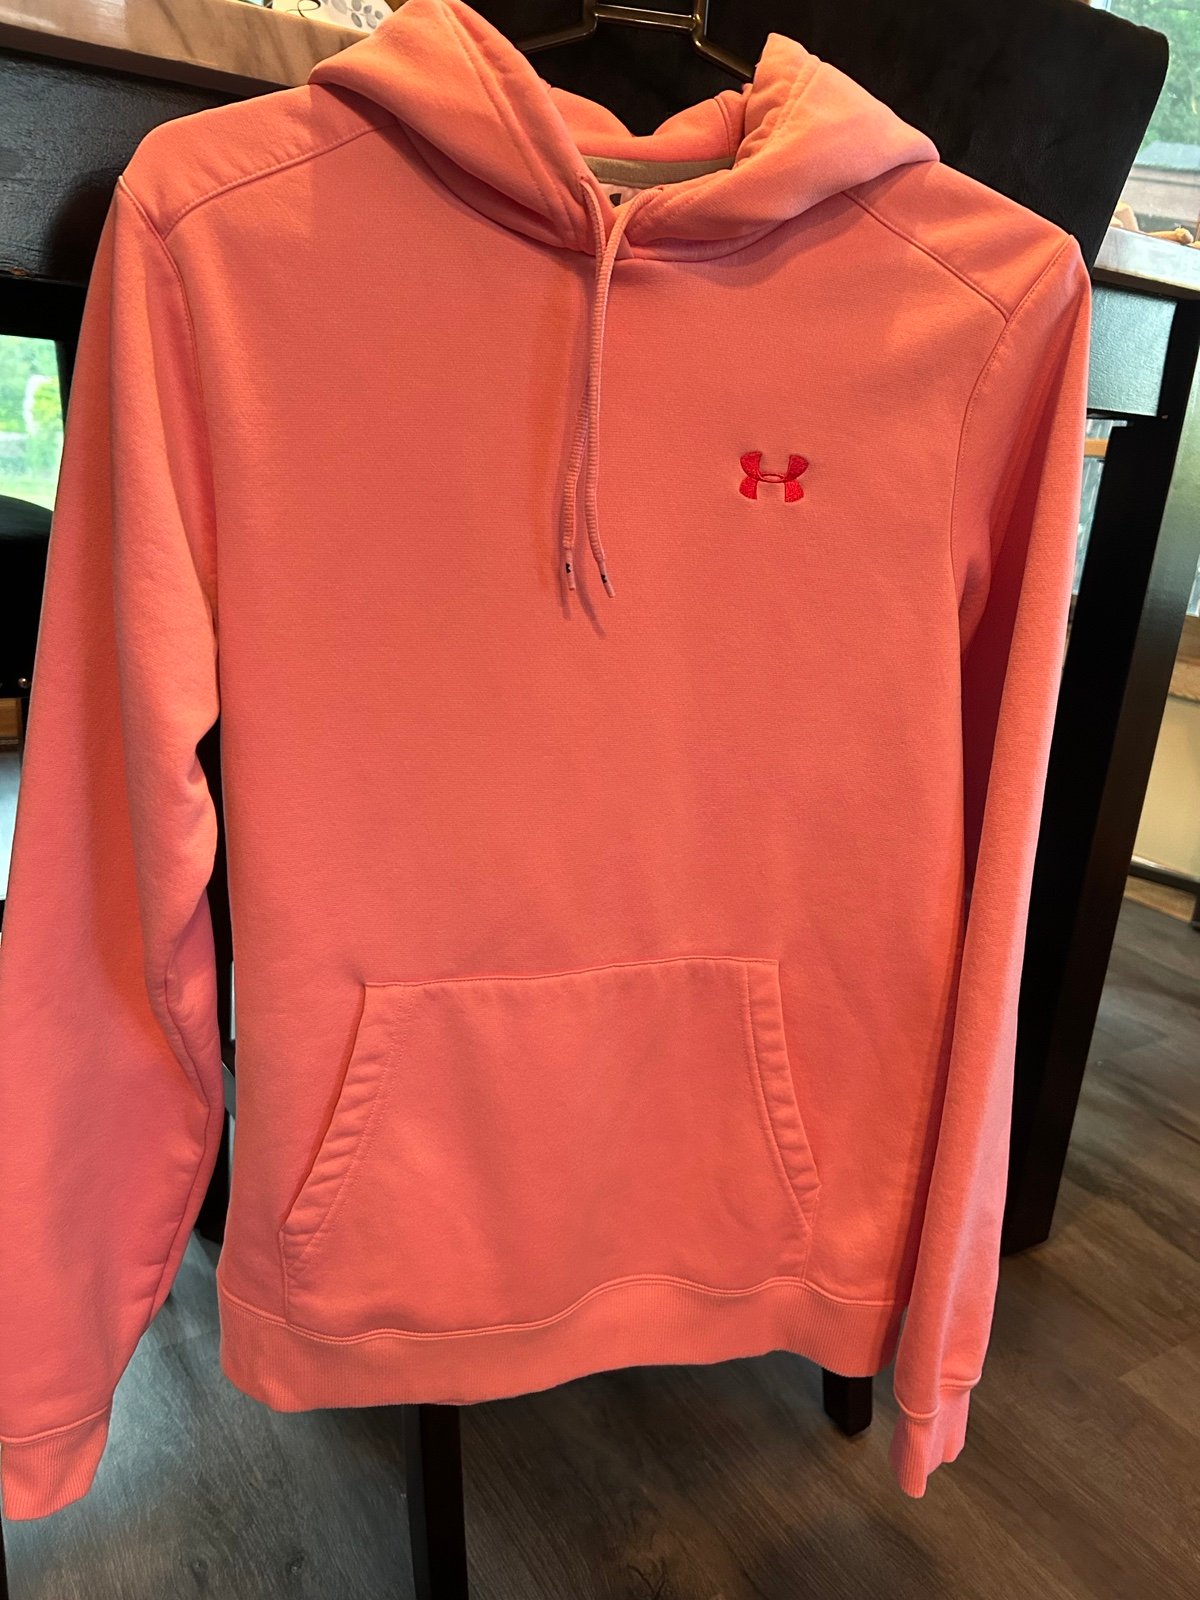 where to buy  Under Armor hoodie S/M pink luaP2D5n1 jus